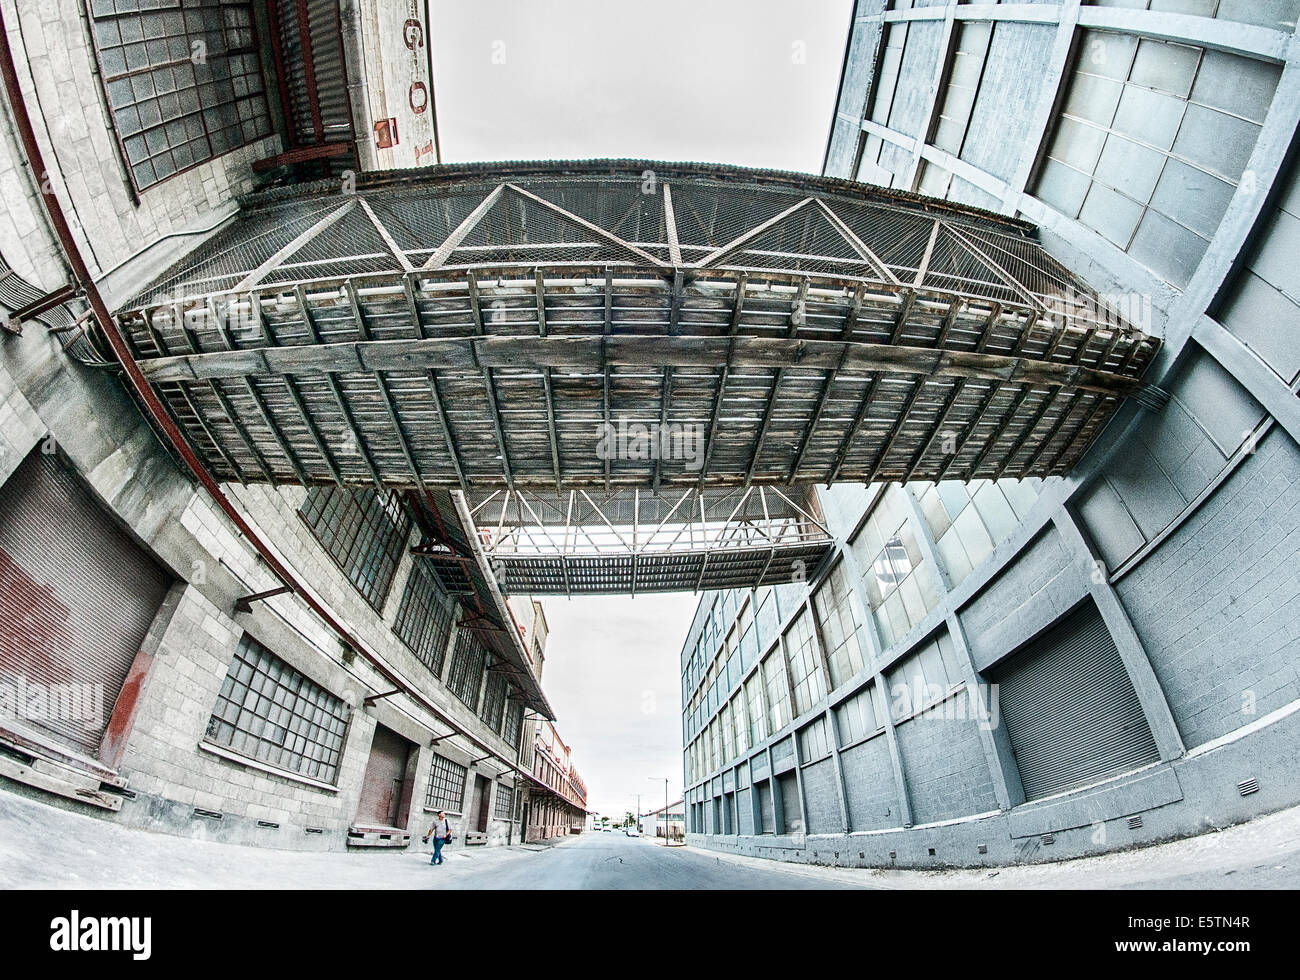 A fish-eye perspective of old warehouses in Port Adelaide, Australia. Stock Photo